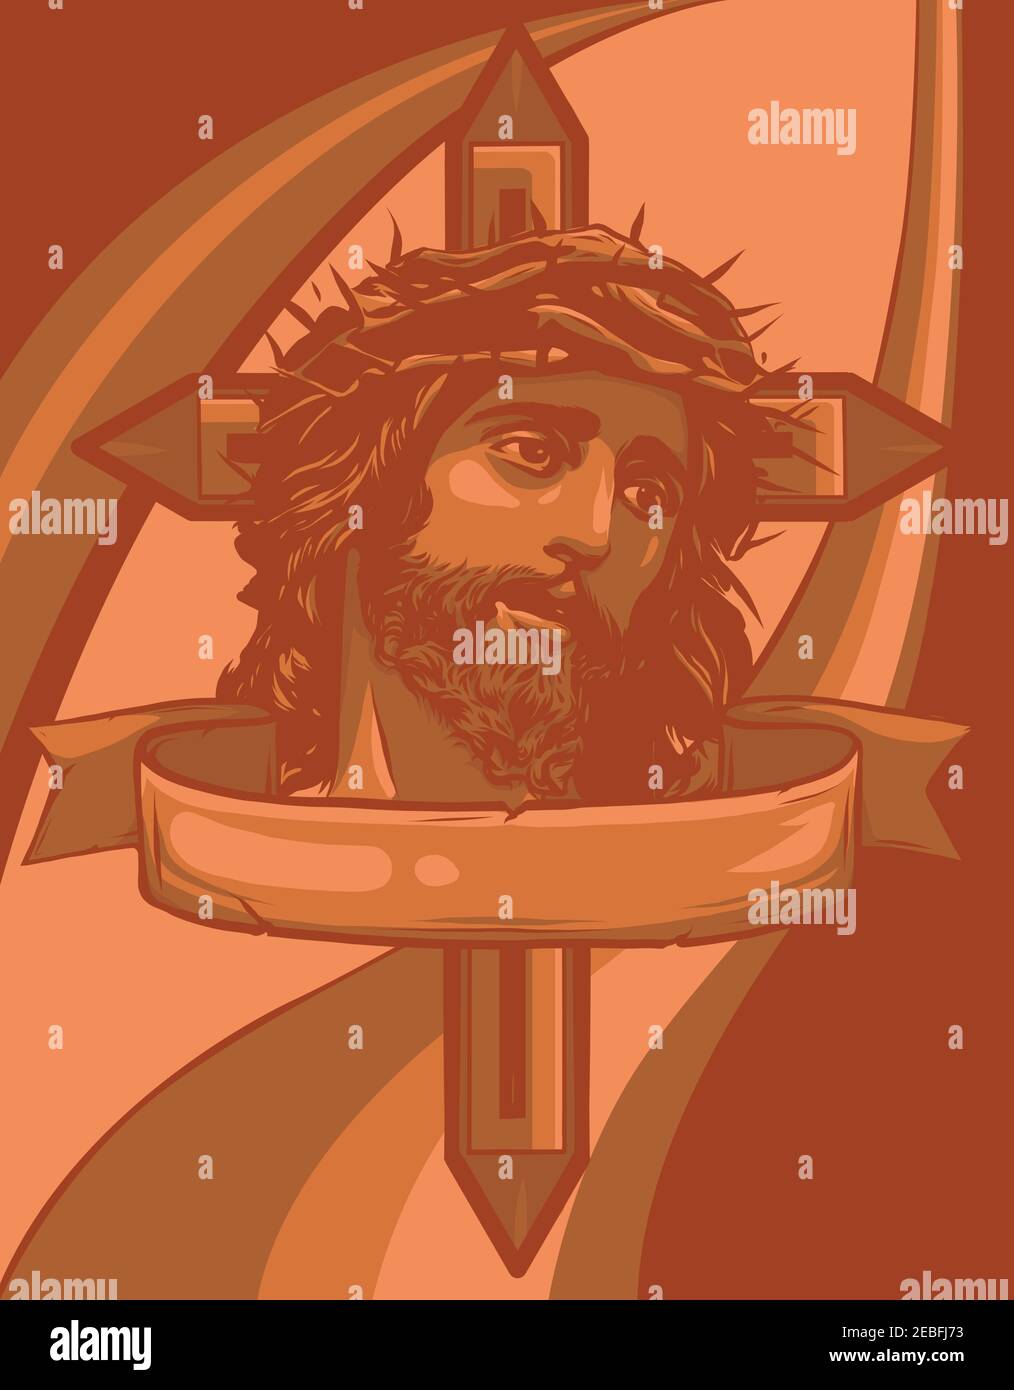 Jesus face design with cross on colored background vector Stock Vector